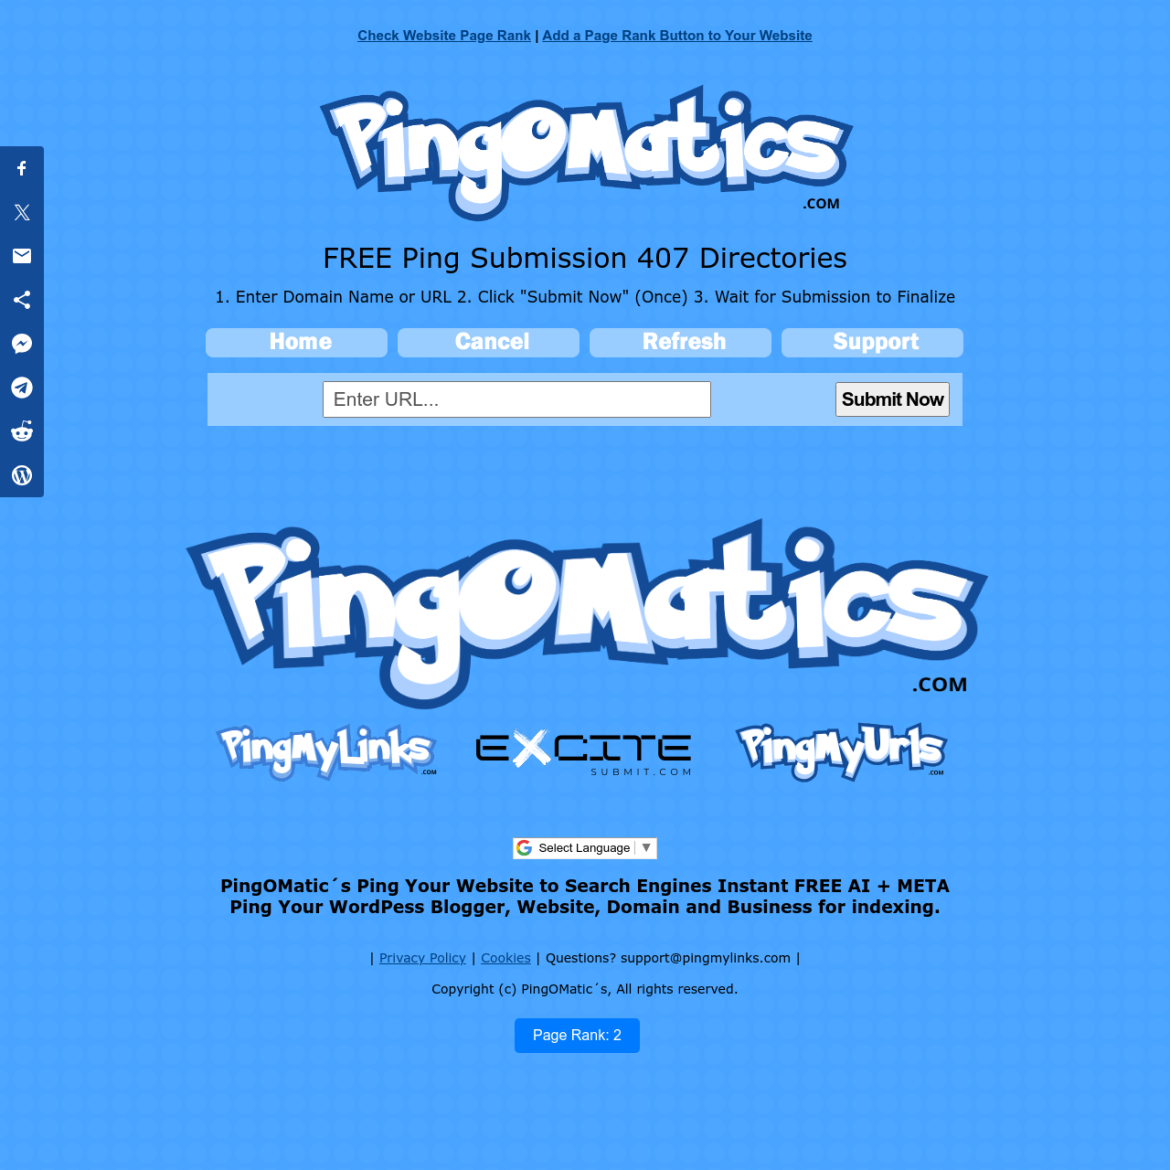 What Does PingOMatic´s Do?